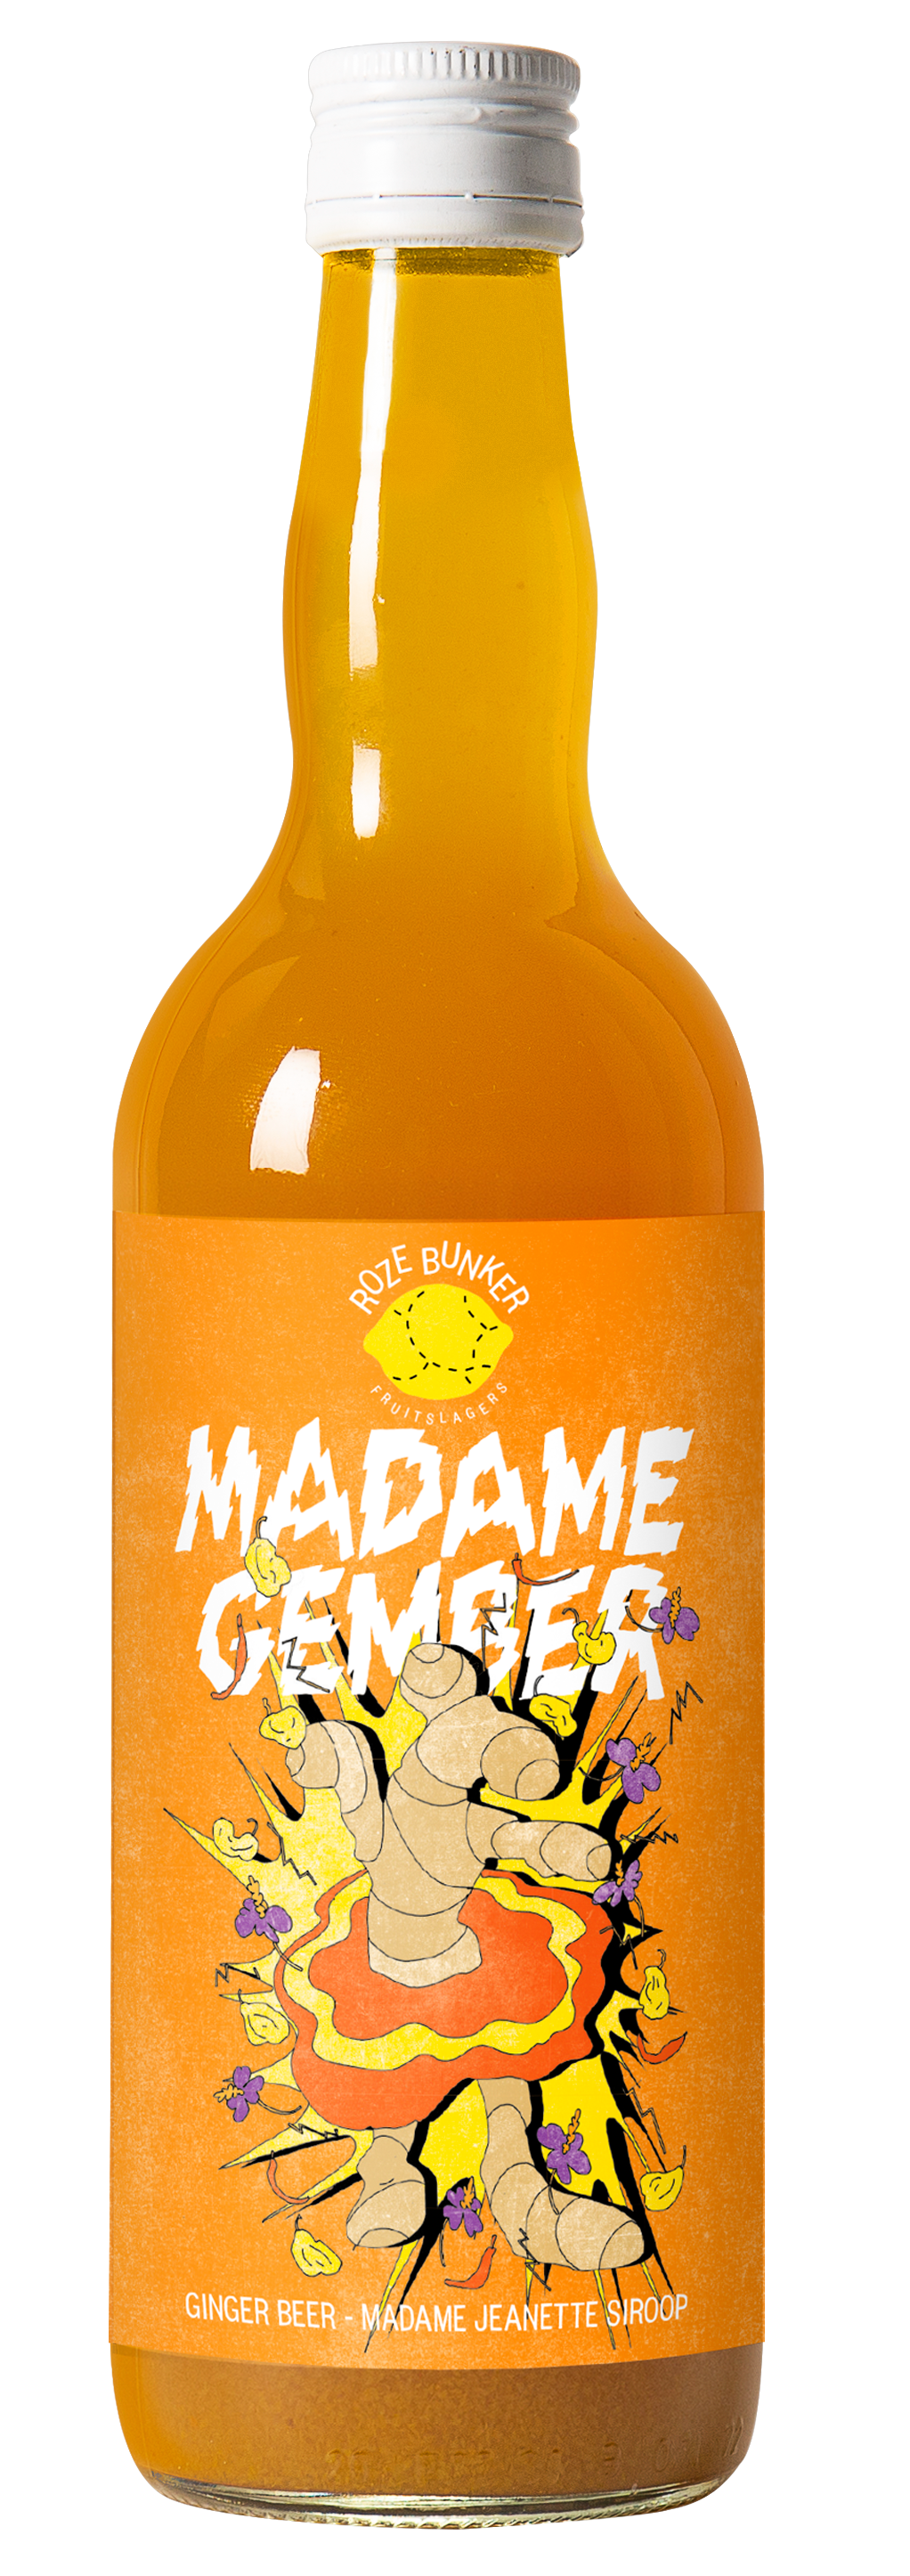 Bottle of Madame ginger syrup by Rozee Bunker